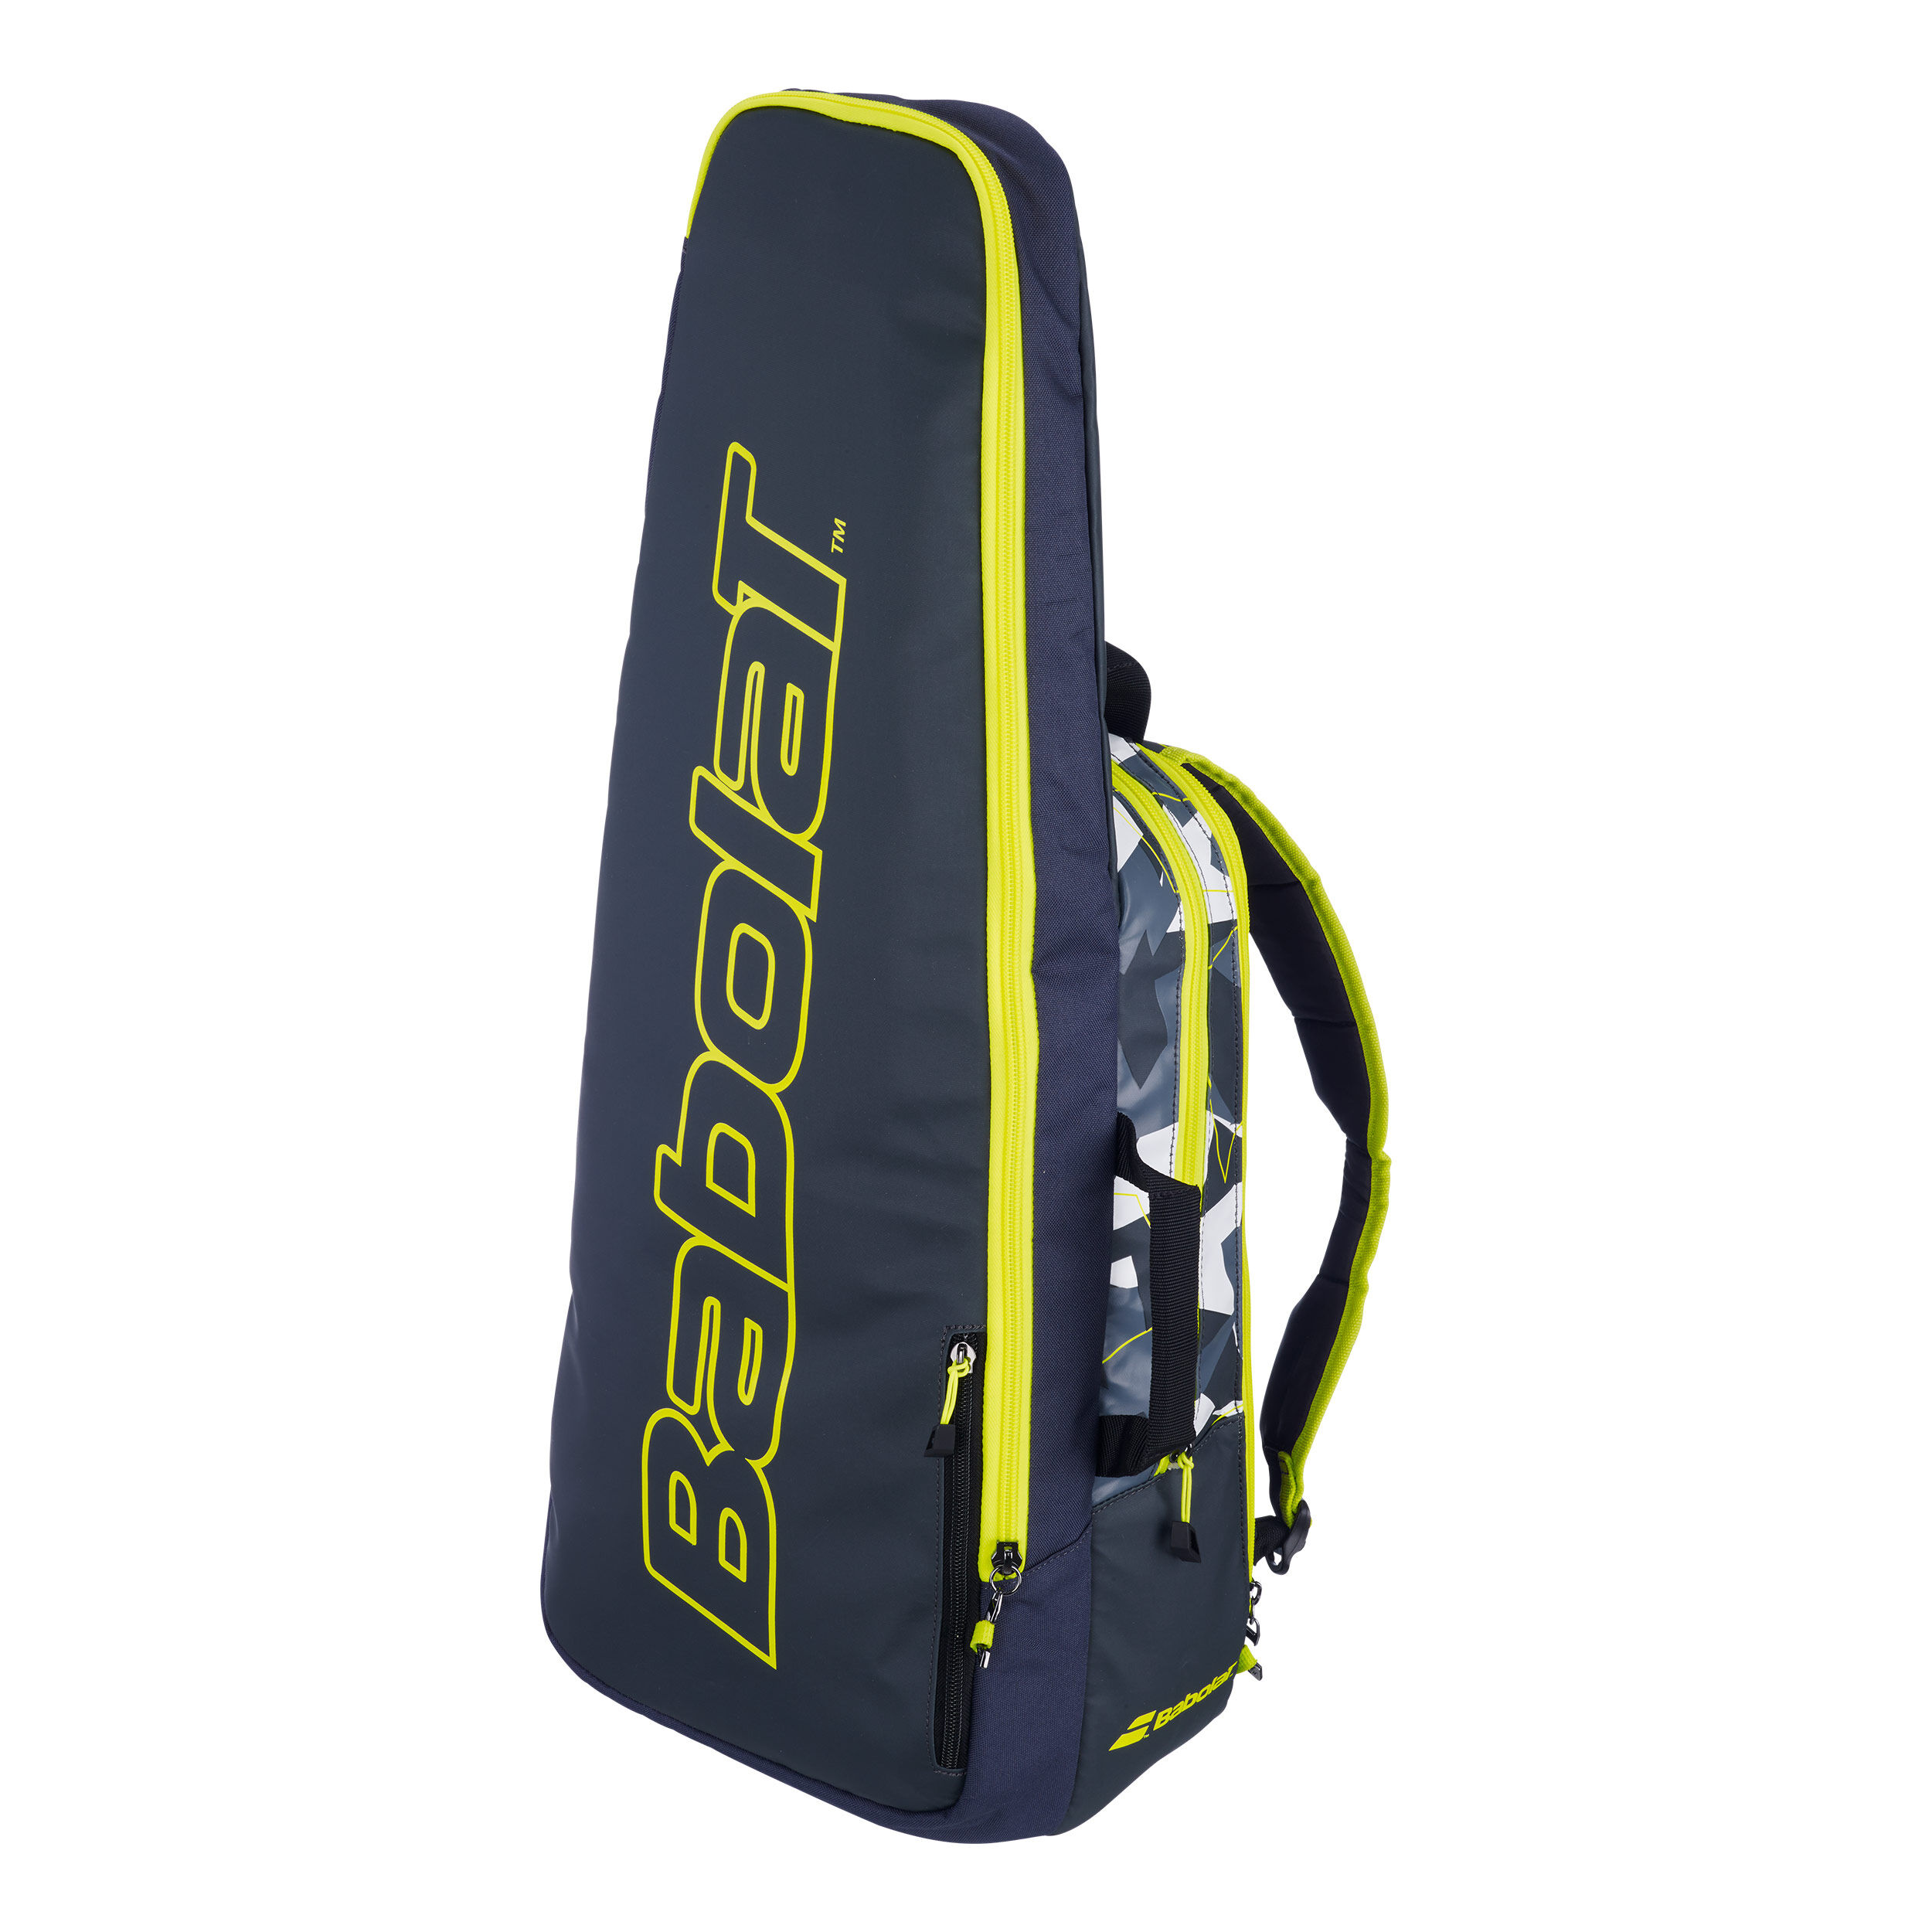 Backpack Pure Aero Backpack - Anthracite, Yellow